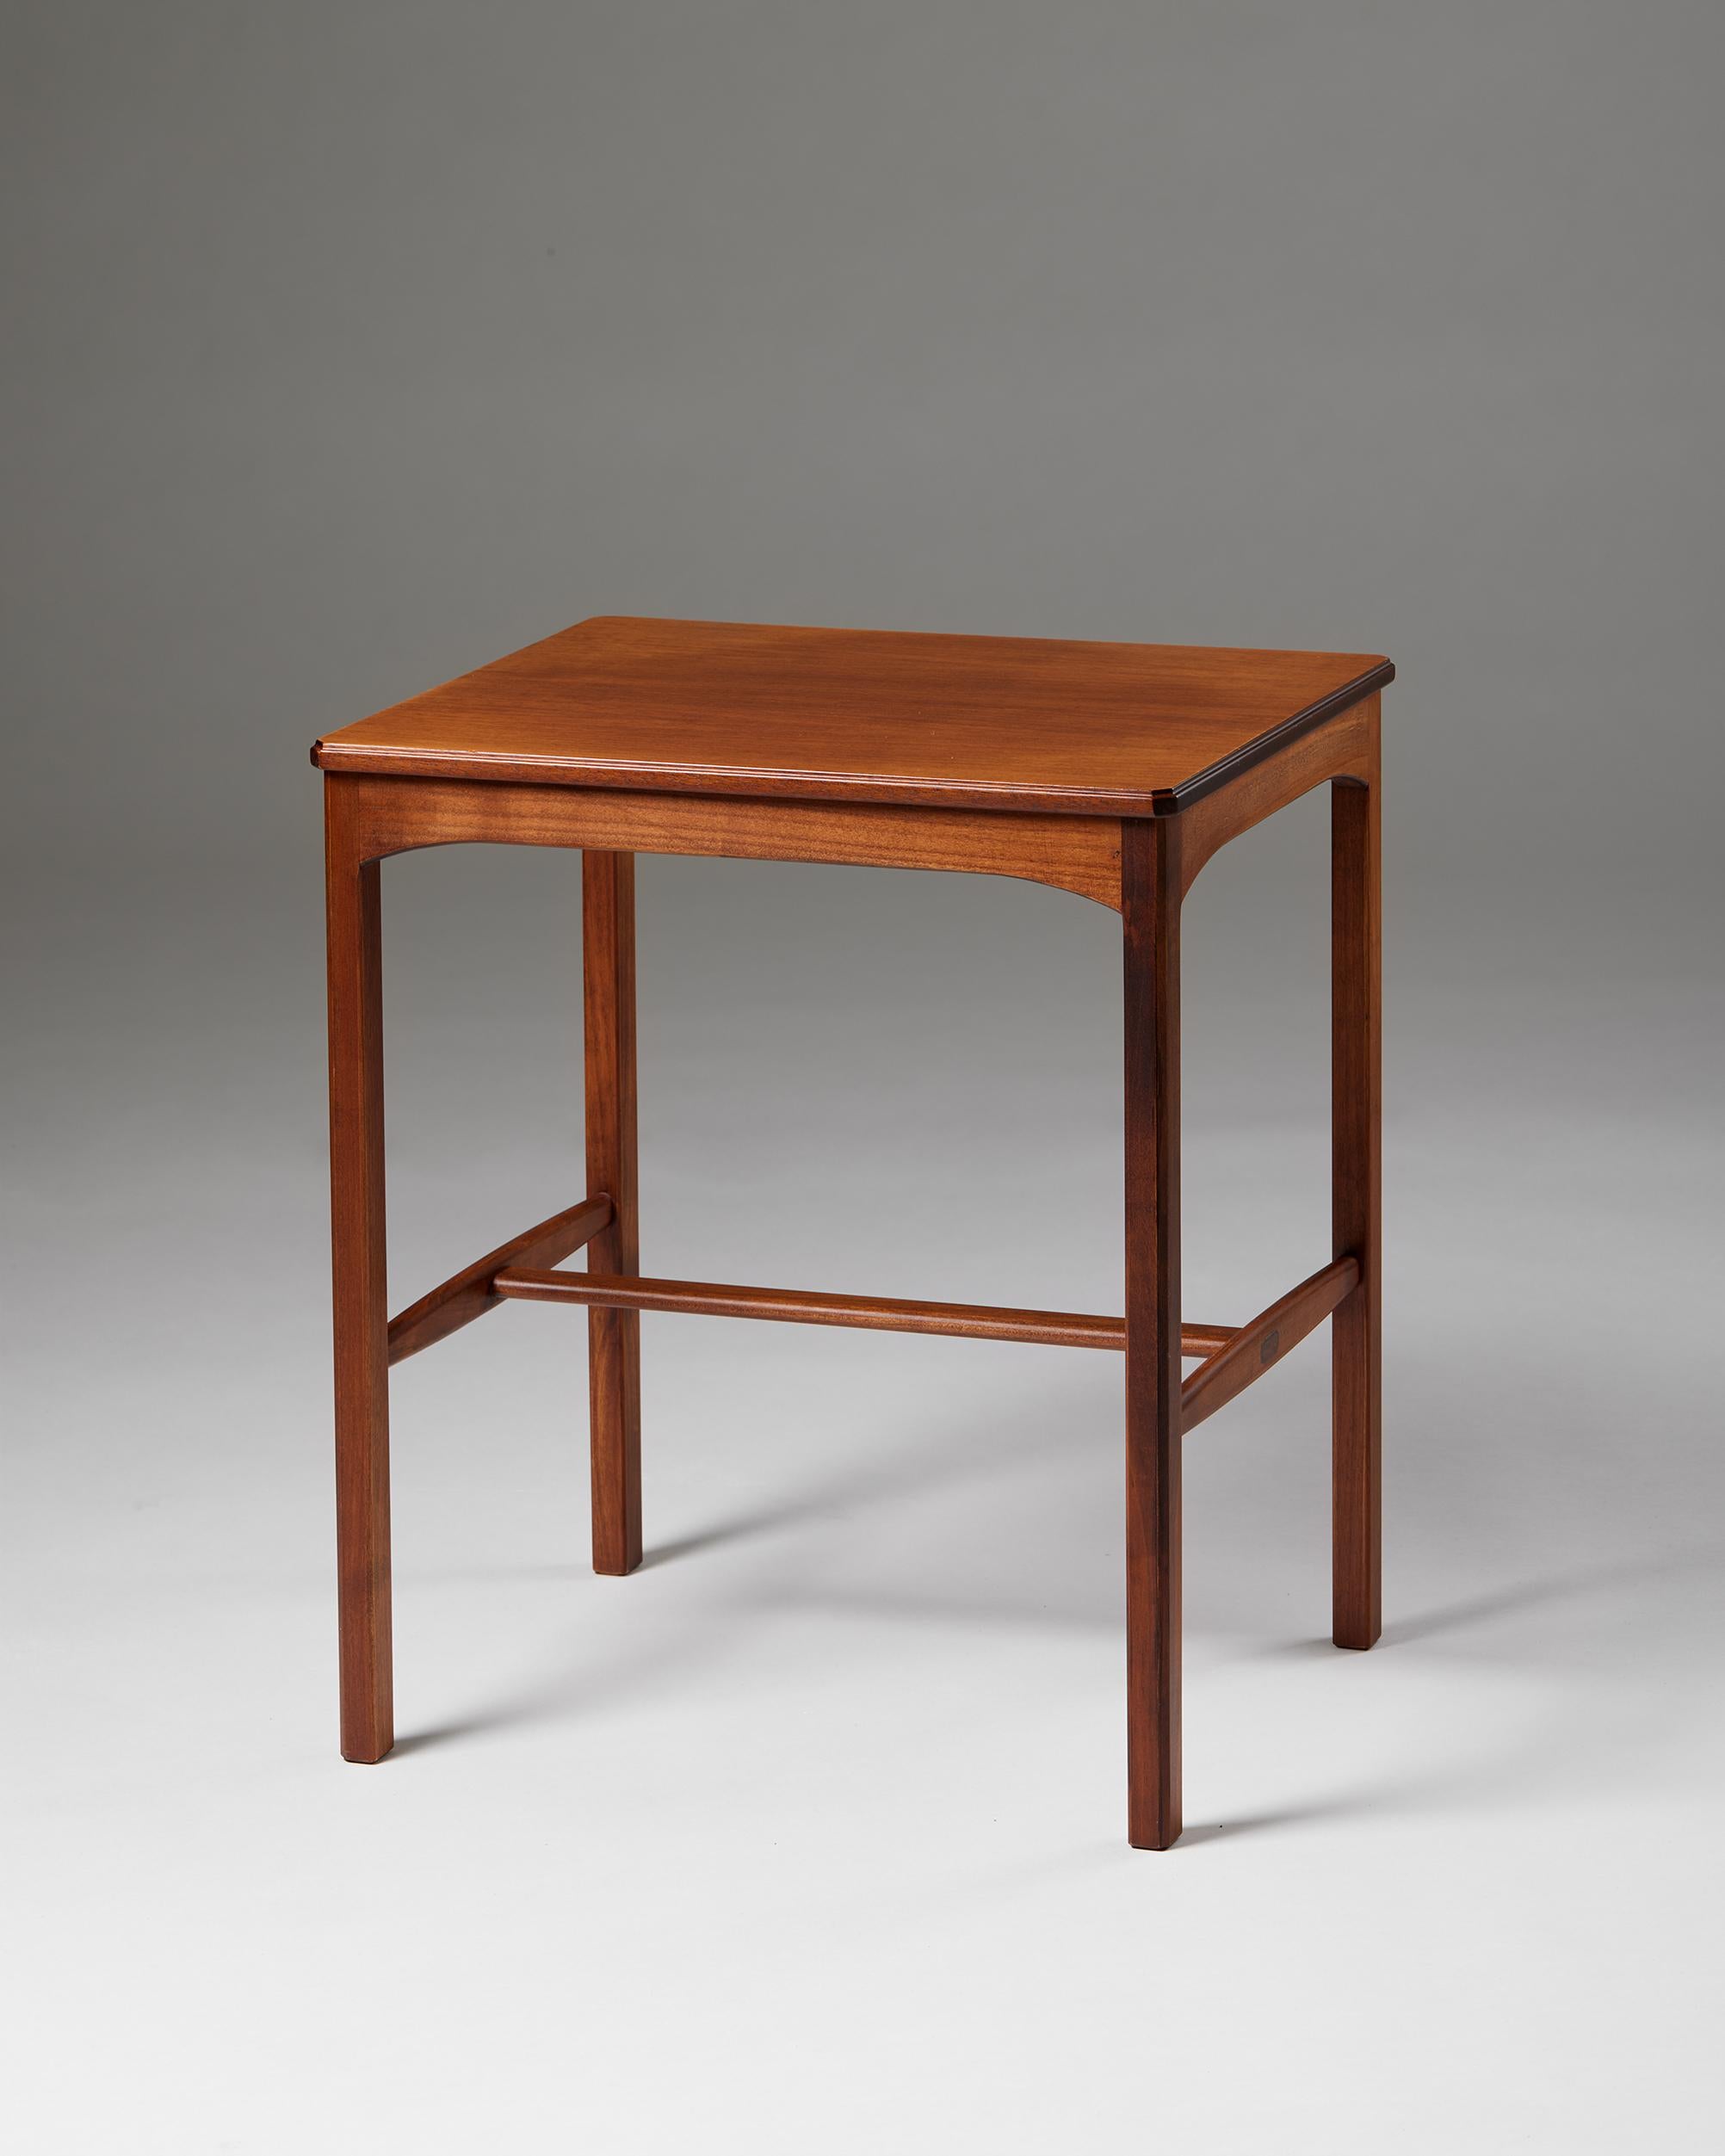 Side table 'October' designed by Carl Malmsten, Sweden, 1950s

Stamped.

Walnut.

Carl Malmsten was a Swedish furniture designer, interior designer, and educator known for his devotion to traditional Swedish craftsmanship. He famously designed the